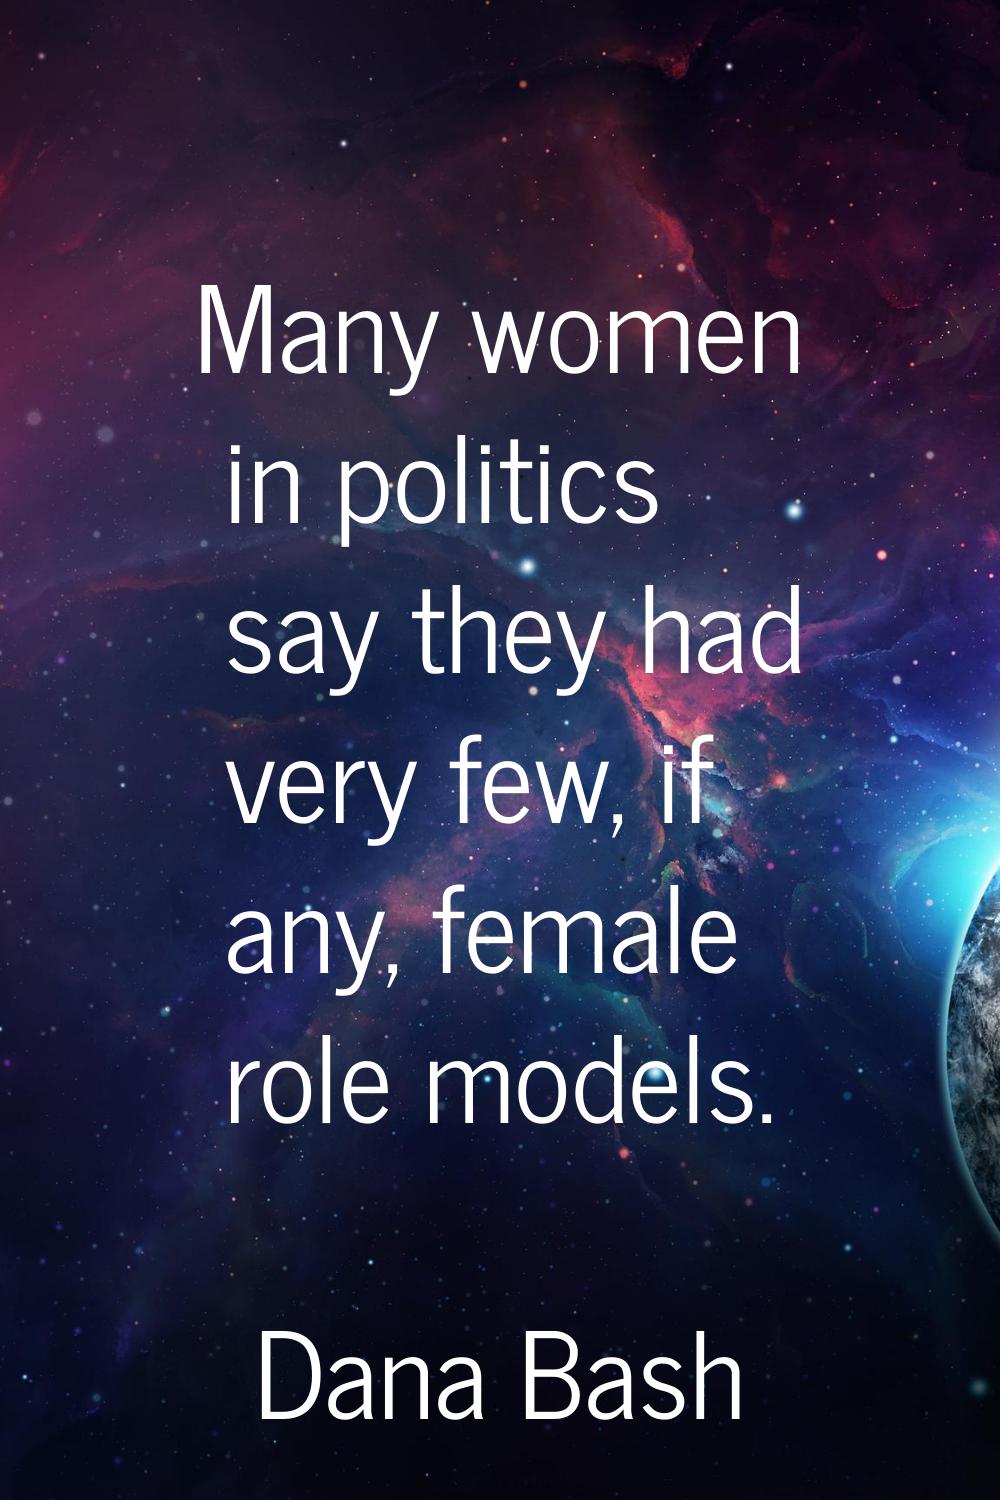 Many women in politics say they had very few, if any, female role models.